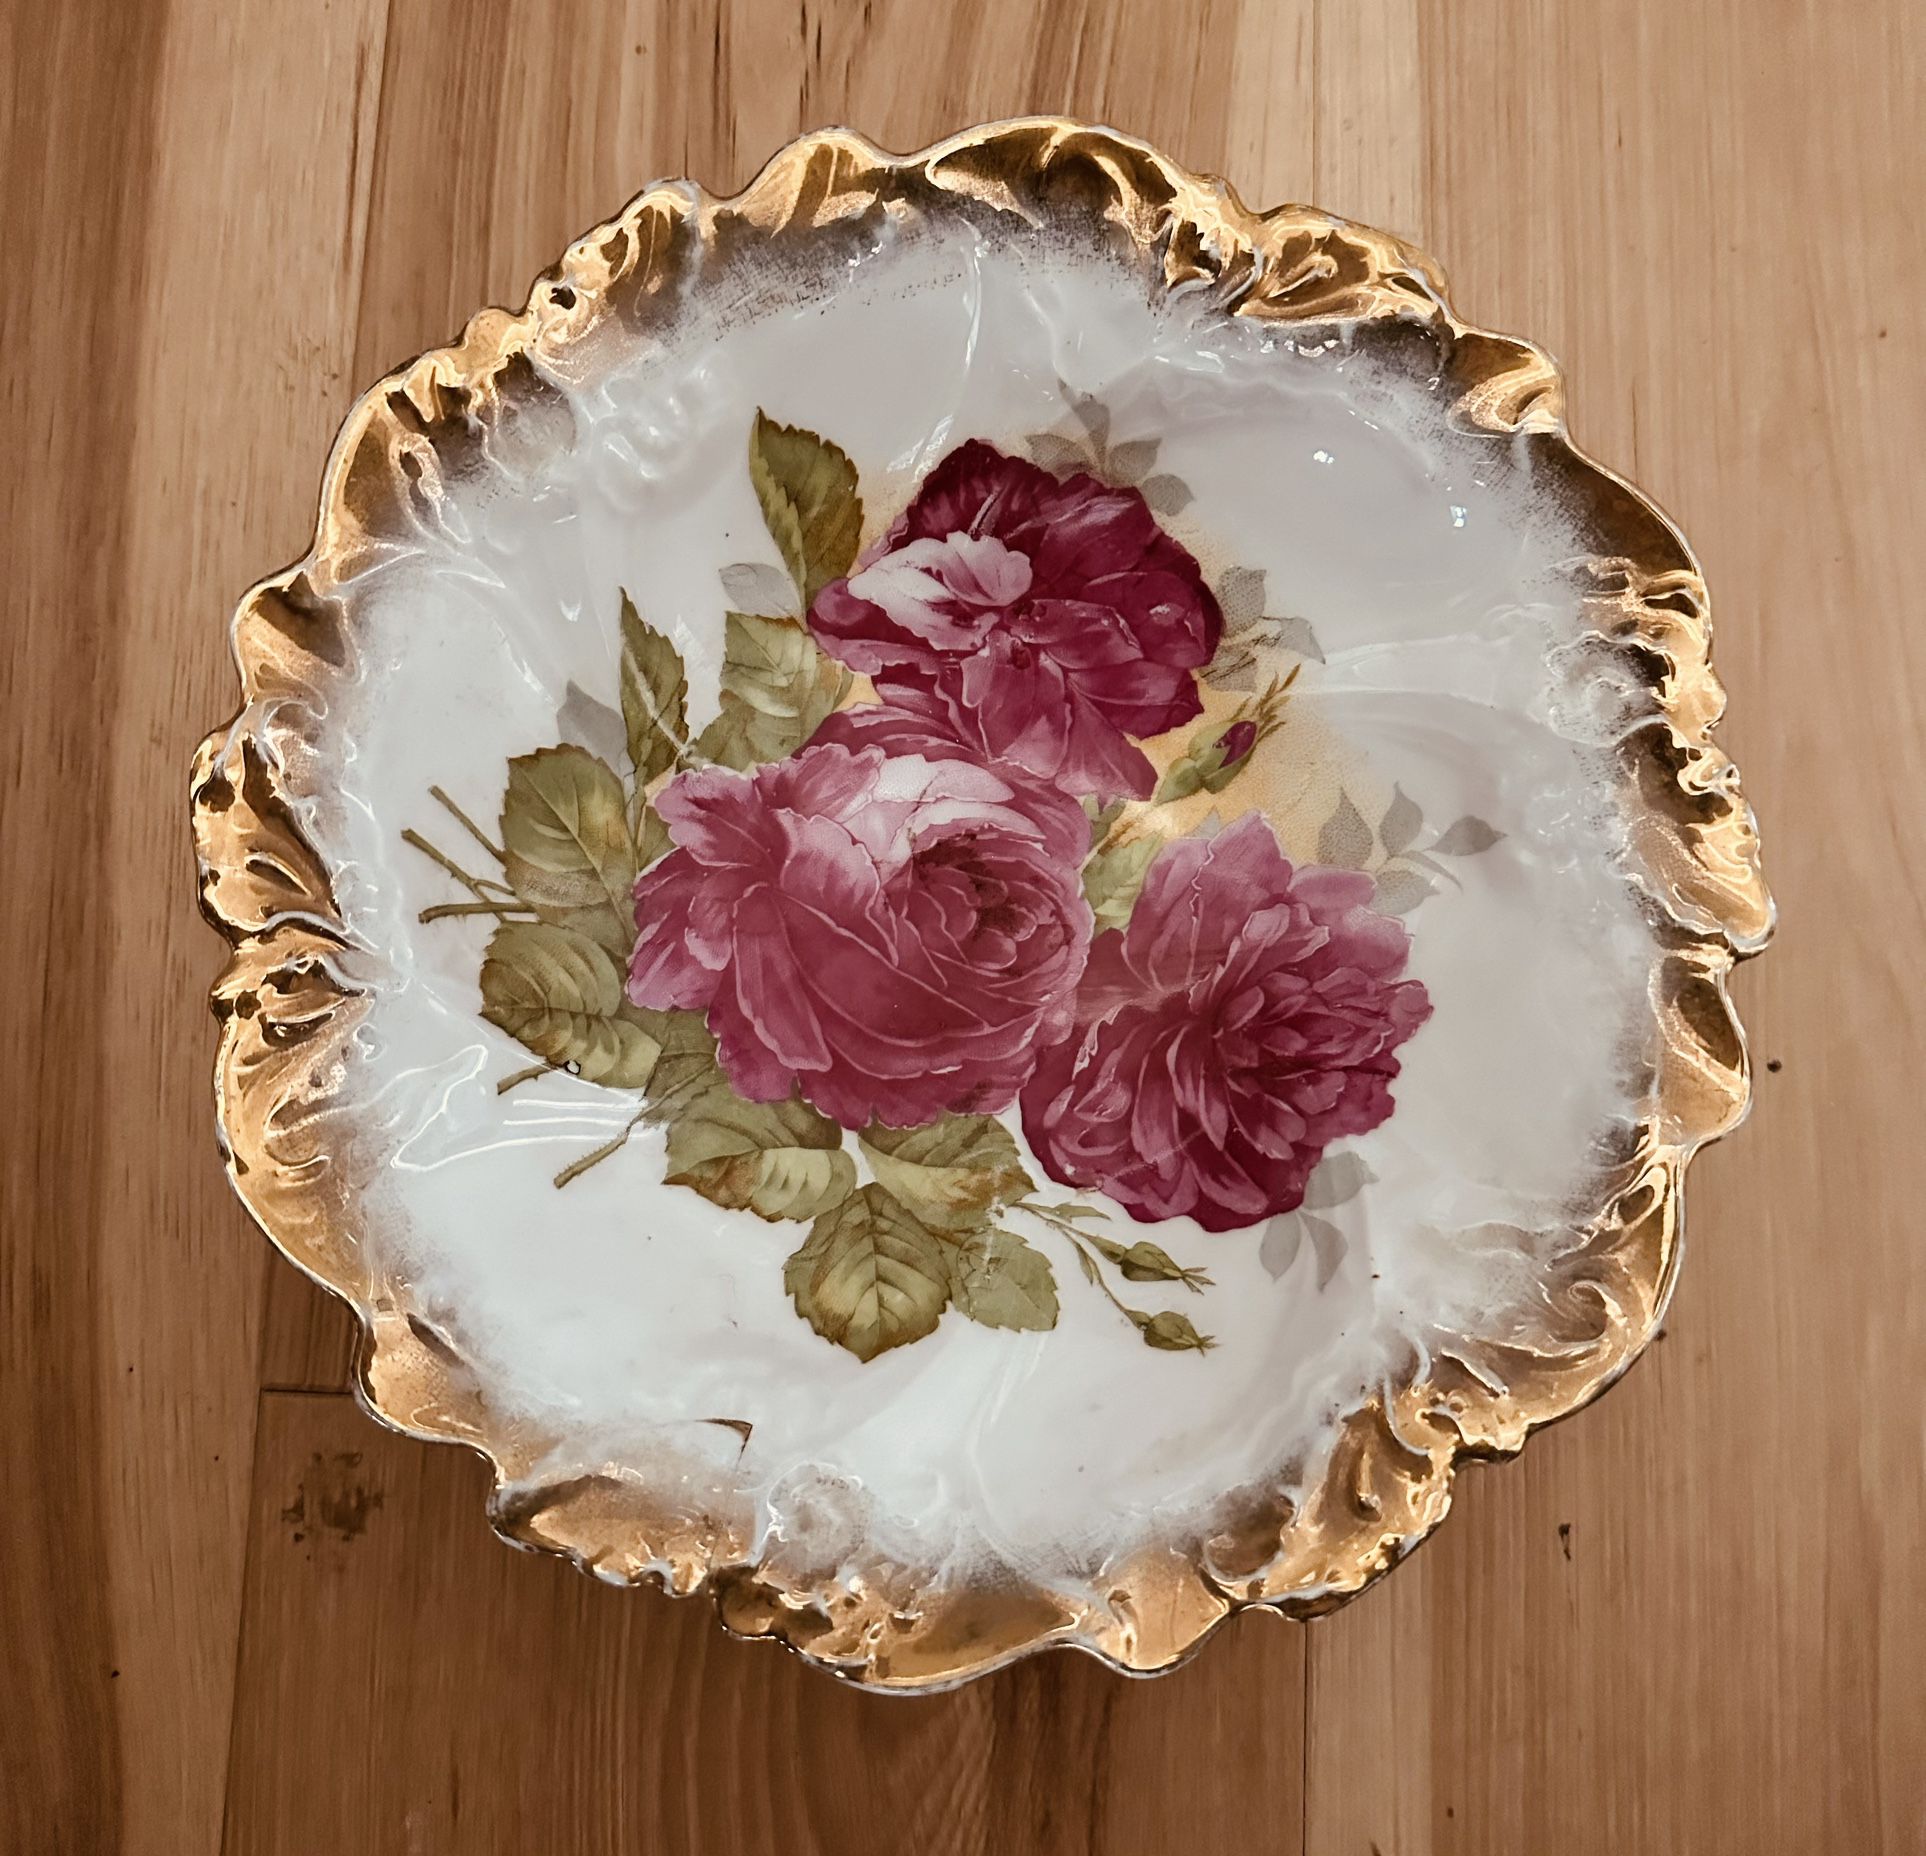 BEAUTIFULLY-PRESERVED VINTAGE PORCELAIN ROSE BOWL from GERMANY ROSE BOWL 